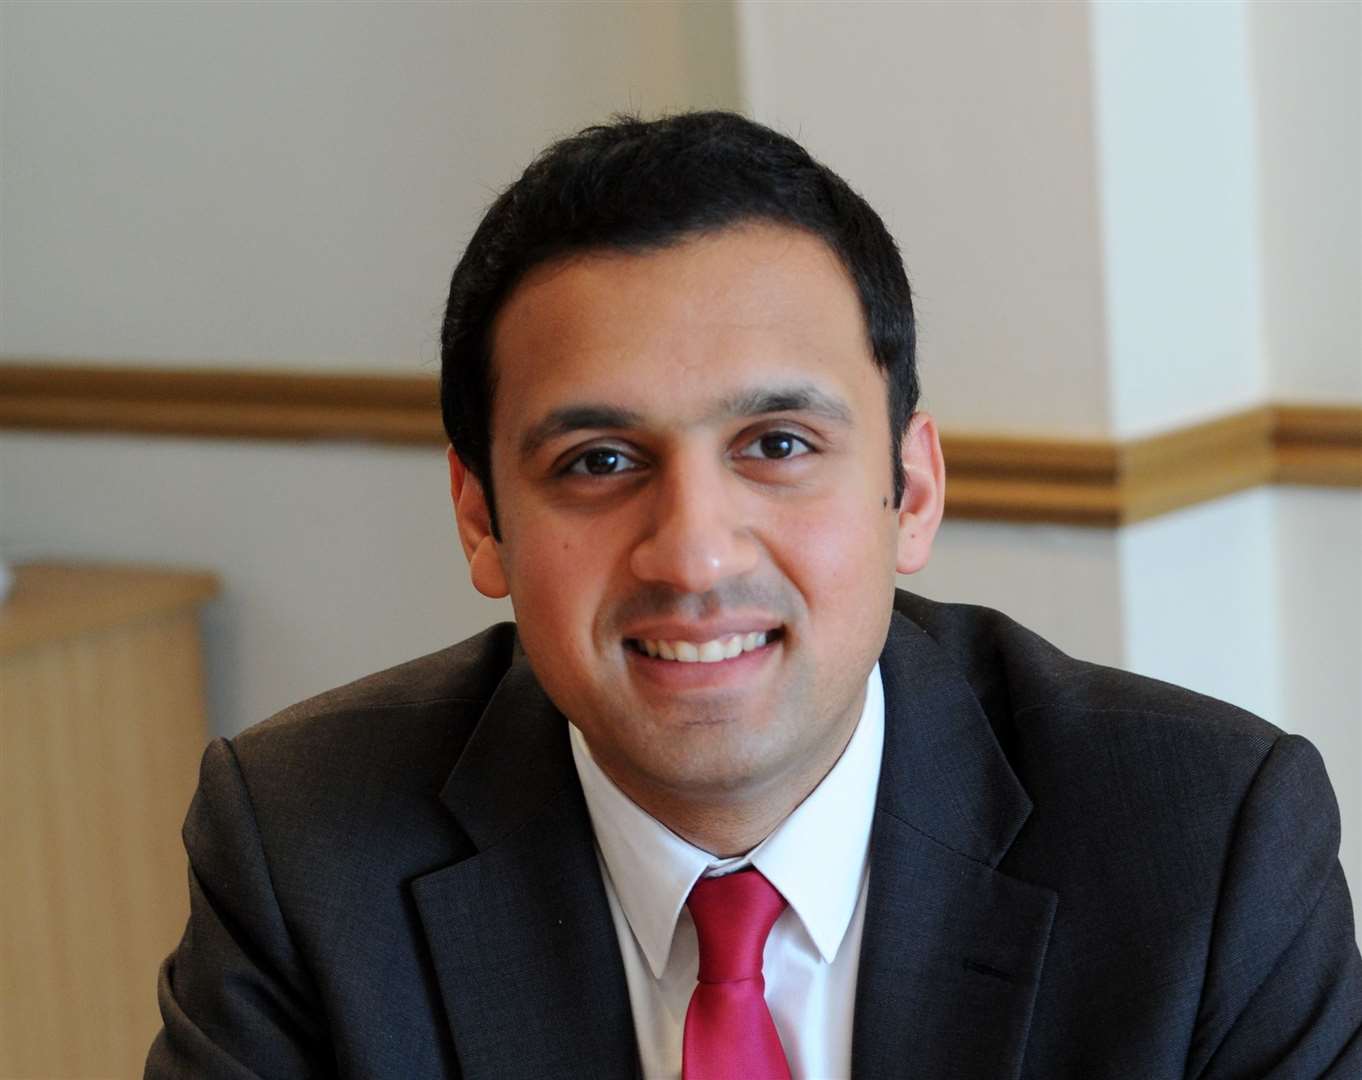 MSP Anas Sarwar now officially takes over from Richard Leonard after the latter's sudden resignation in January.